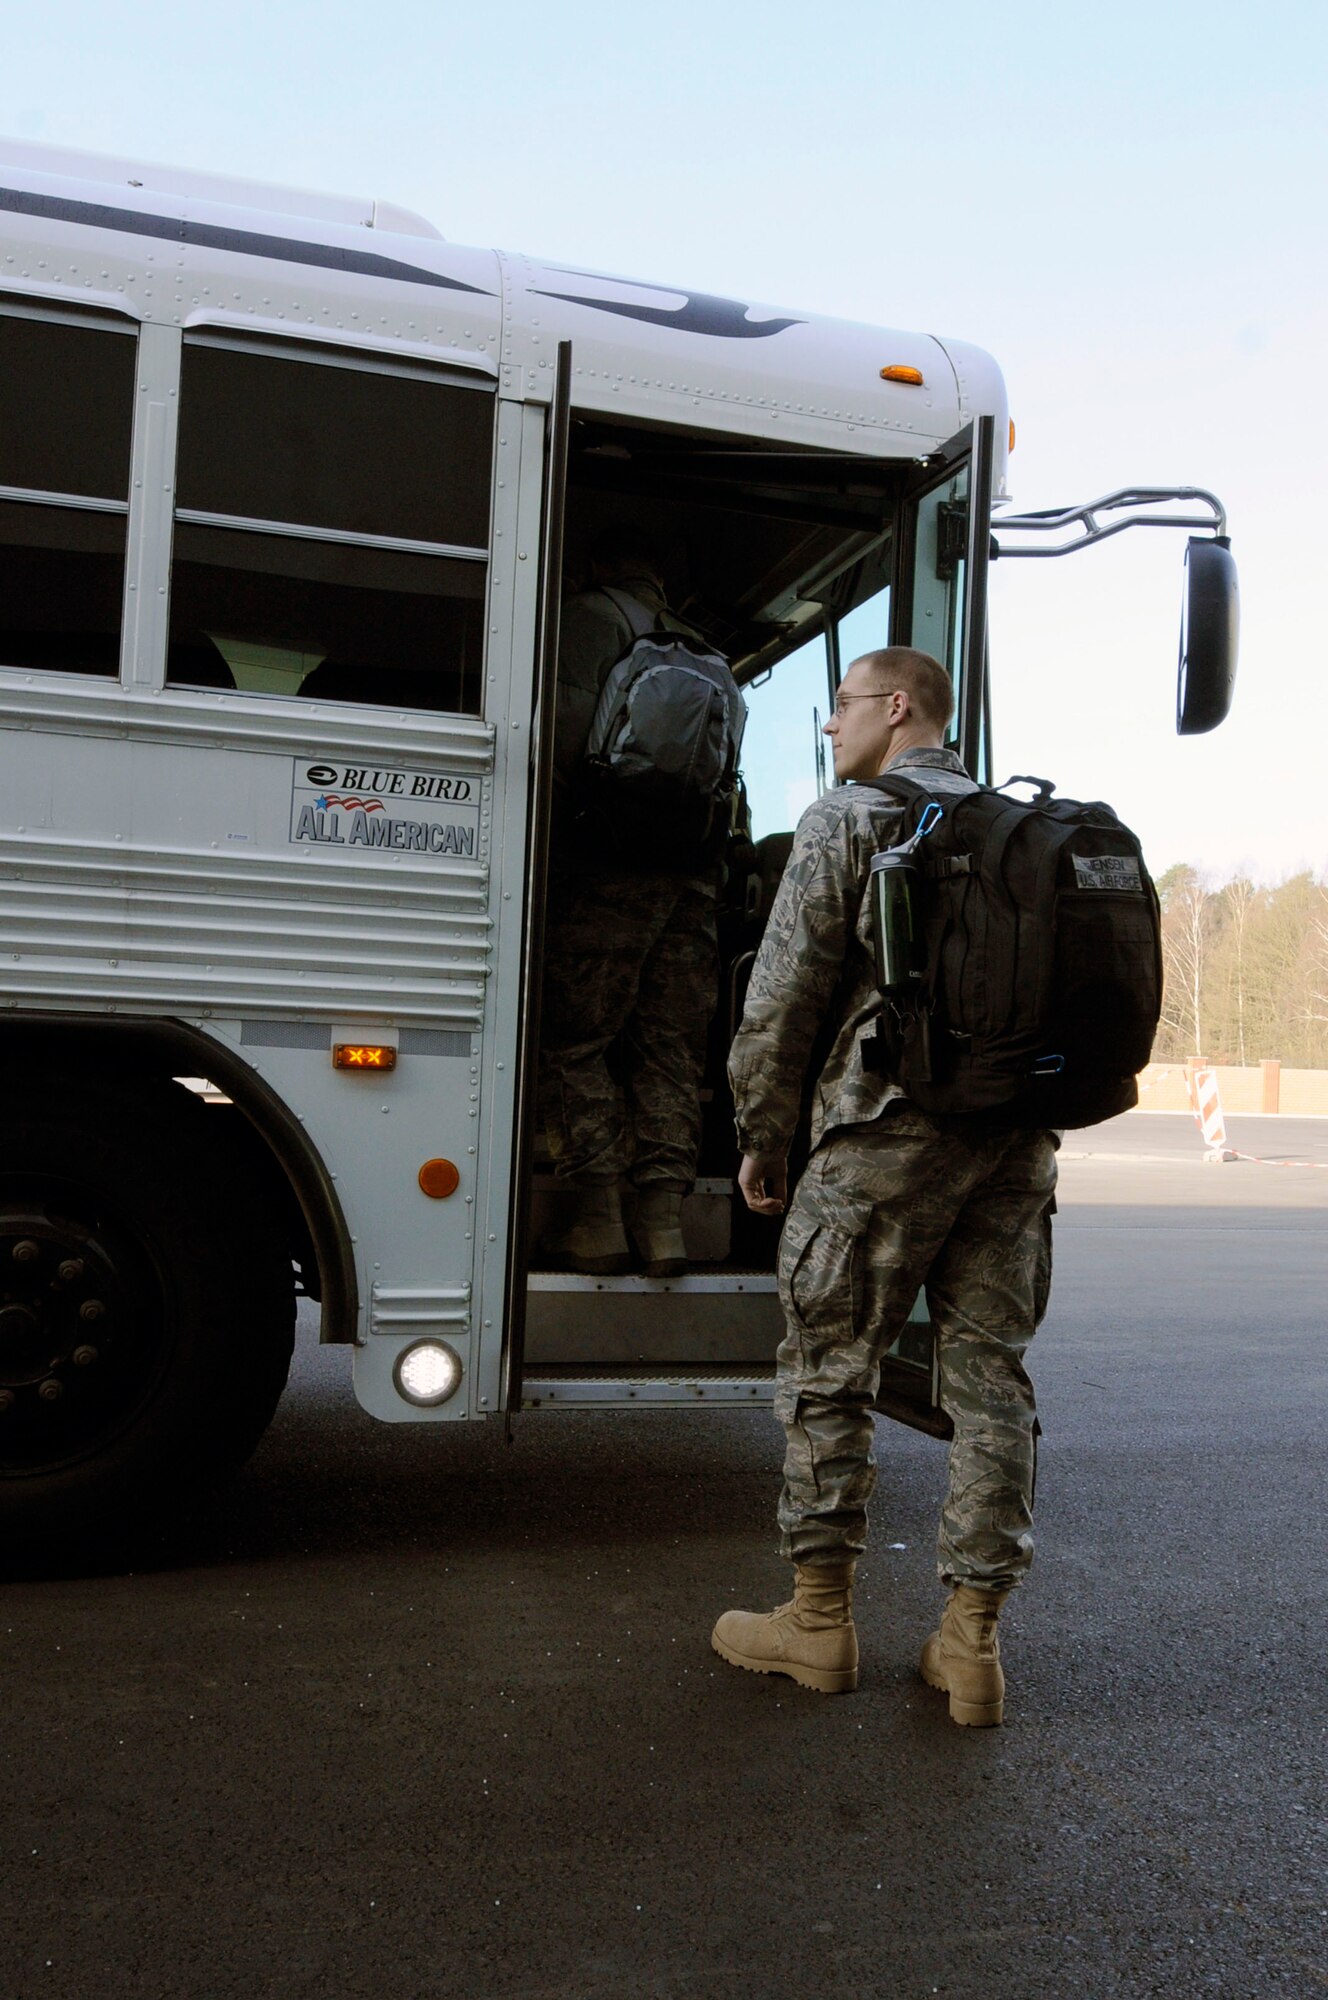 U.S. Air Force 1st Lt. Douglas Jensen, 1st Combat Communications Squadron, loads onto a bus before deploying in support of Joint Task Force Odyssey Dawn, Ramstein Air Base, Germany, March 24, 2011. Joint Task Force Odyssey Dawn is the U.S. Africa Command task force established to provide operational and tactical command and control of U.S. military forces supporting the international response to the unrest in Libya and enforcement of United Nations Security Council Resolution (UNSCR) 1973. UNSCR 1973 authorizes all necessary measures to protect civilians in Libya under threat of attack by Qadhafi regime forces.  JTF Odyssey Dawn is commanded by U.S. Navy Admiral Samuel J. Locklear, III.   (U.S. Air Force photo by Airman Kendra Alba)